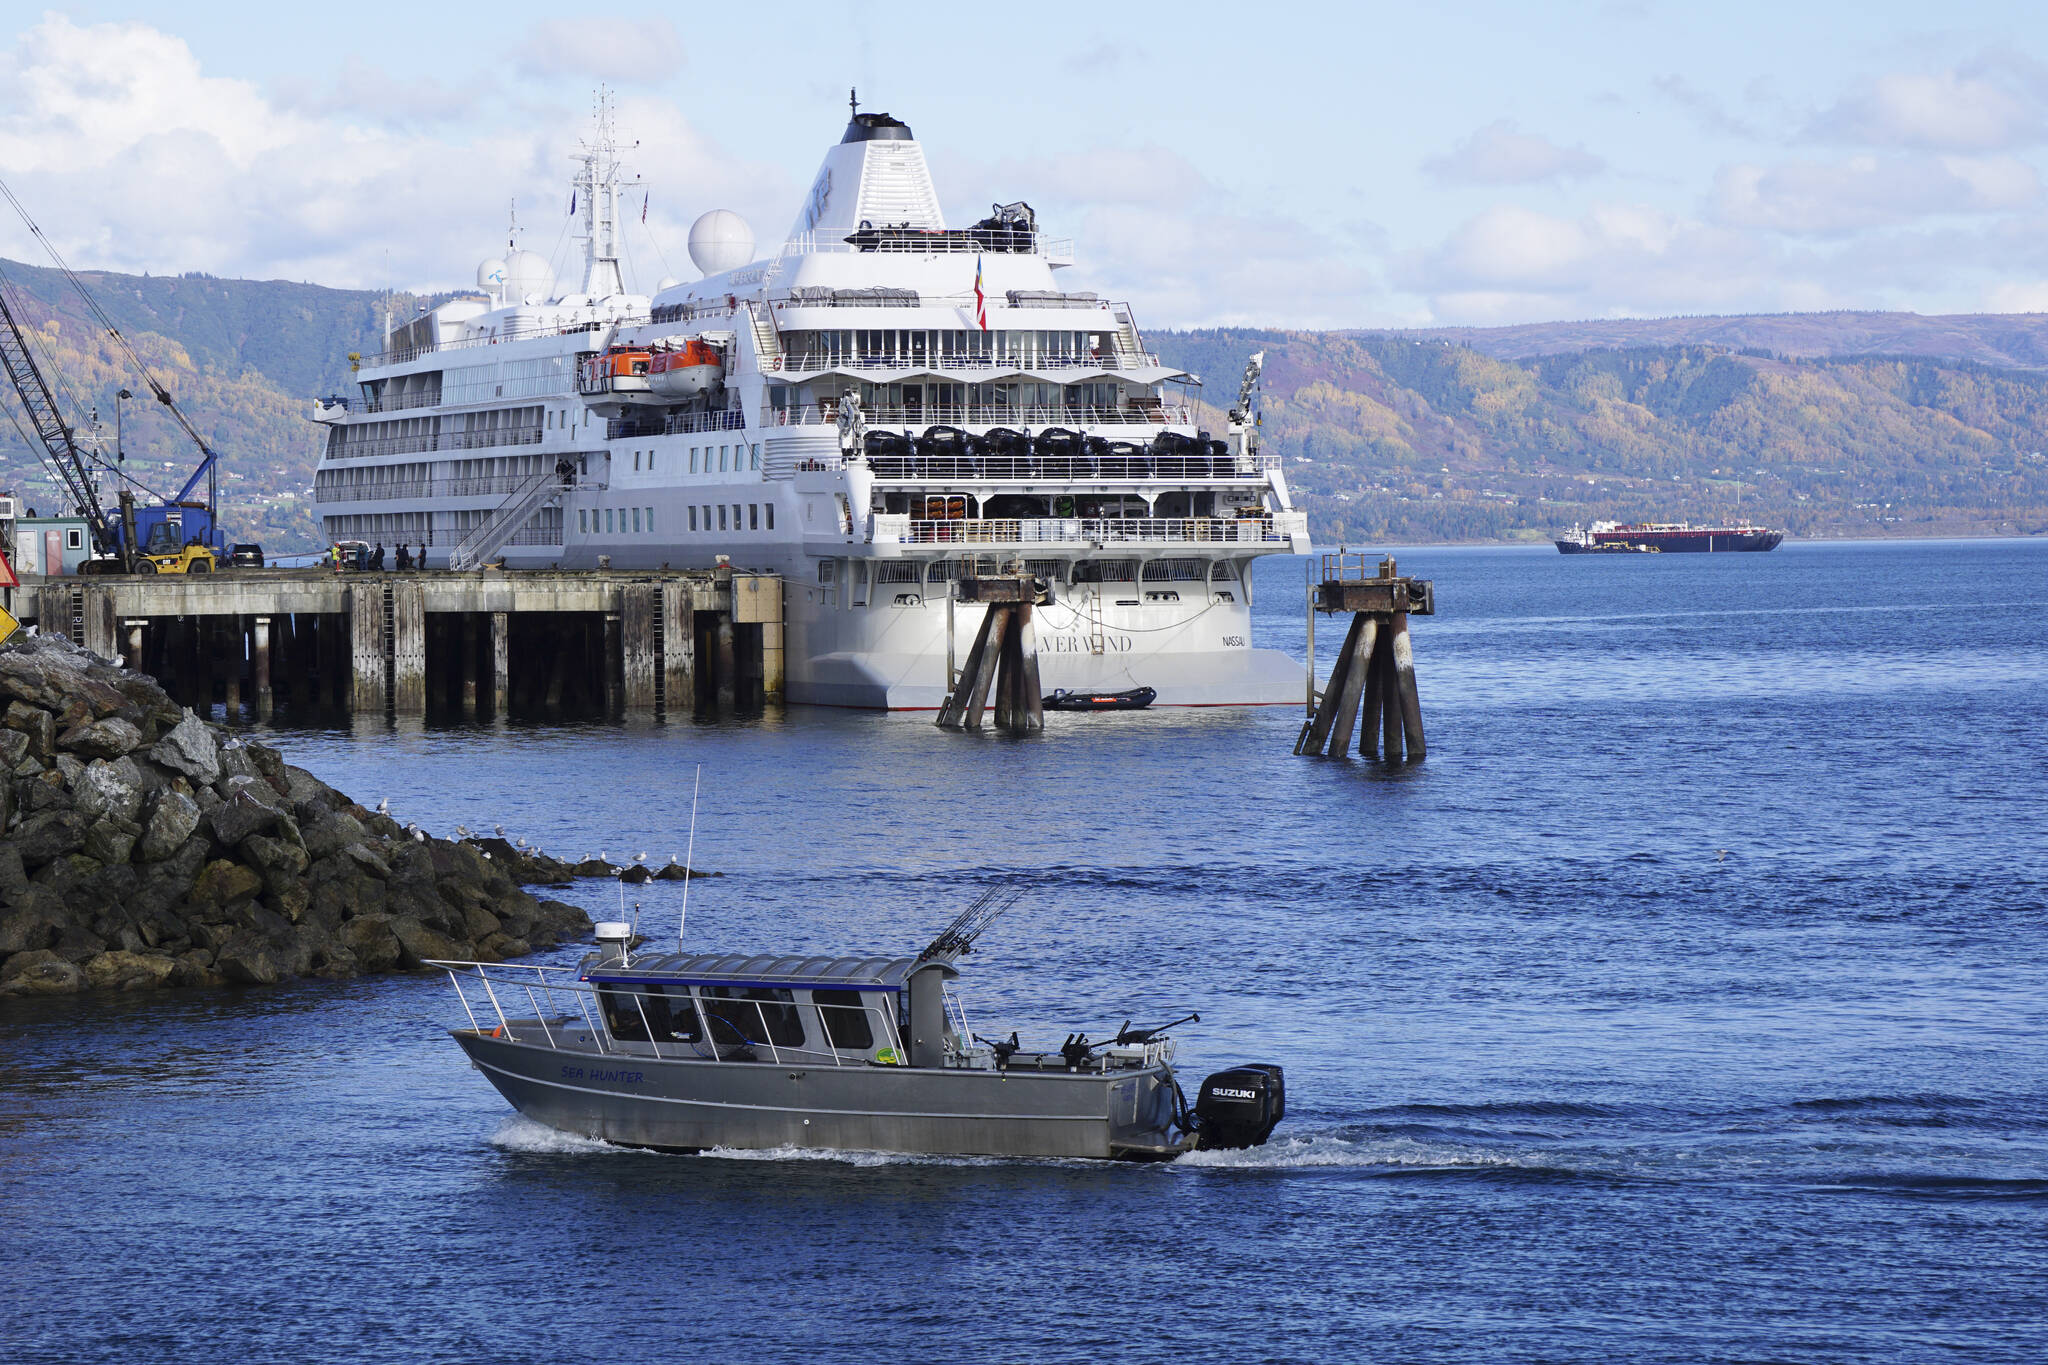 Photo by Michael Armstrong/Homer News
A fishing boat passes the Silversea cruise ship Silver Wind as the boat enters the Homer Harbor on Sunday, Sept. 25, in Homer.